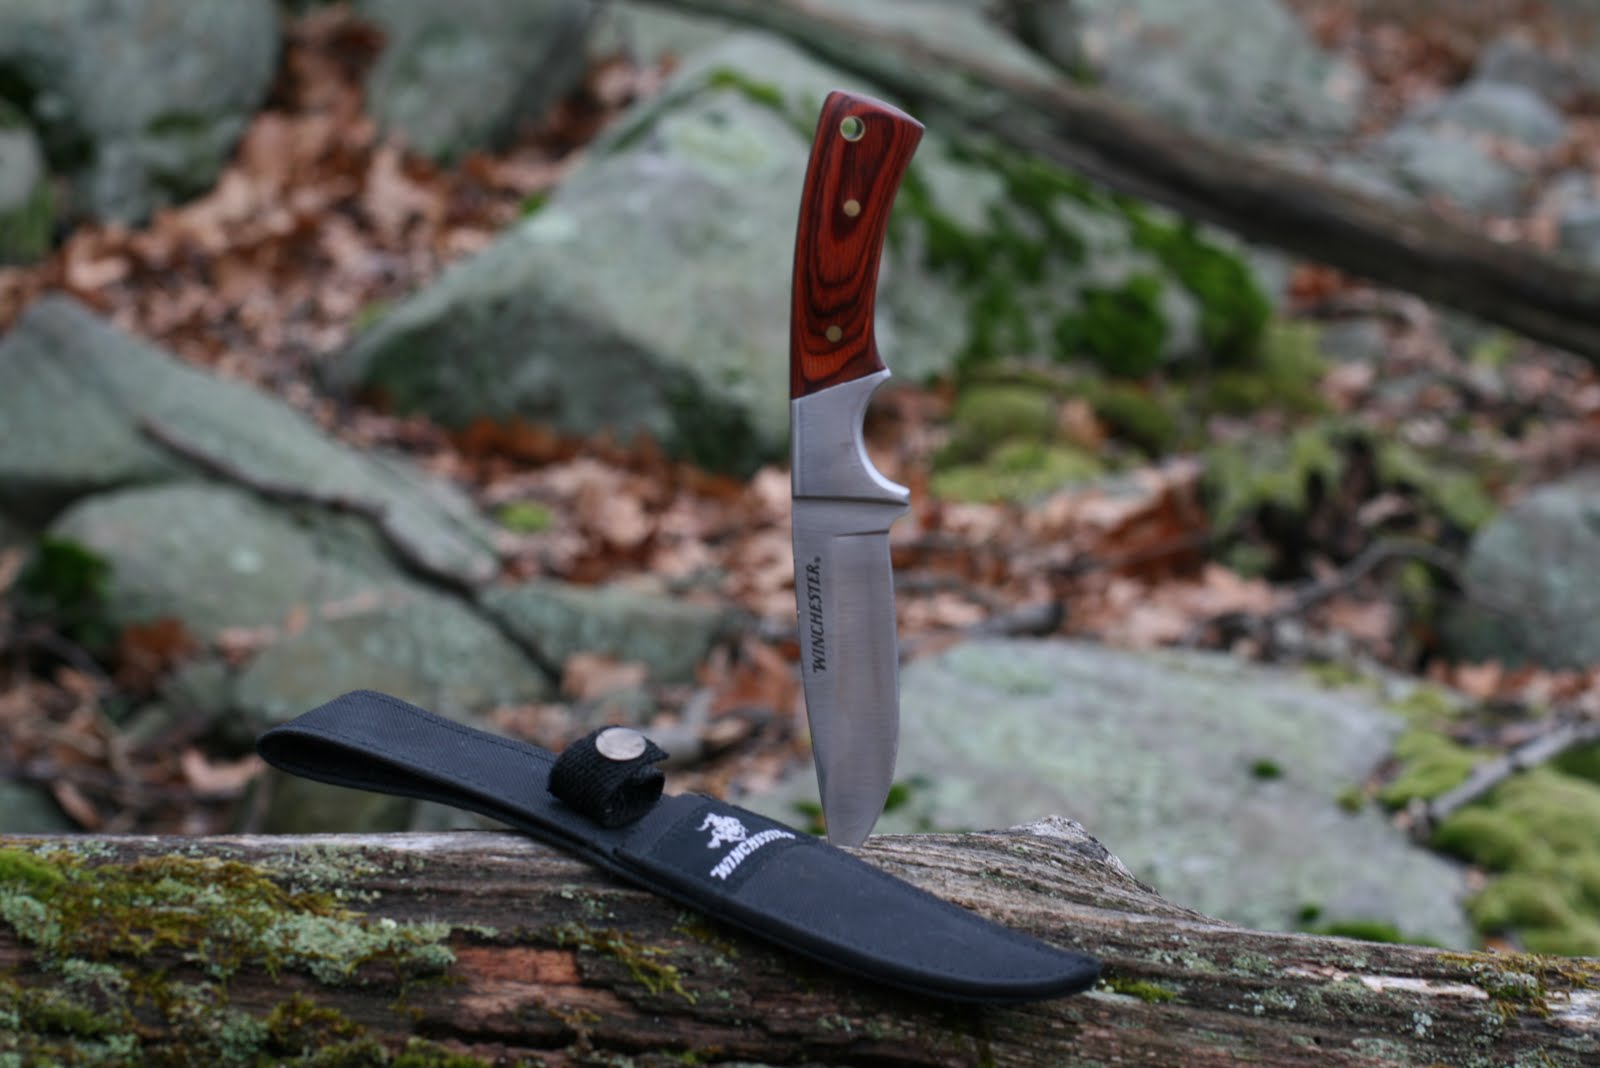 An Overview of Handle Materials For Knives